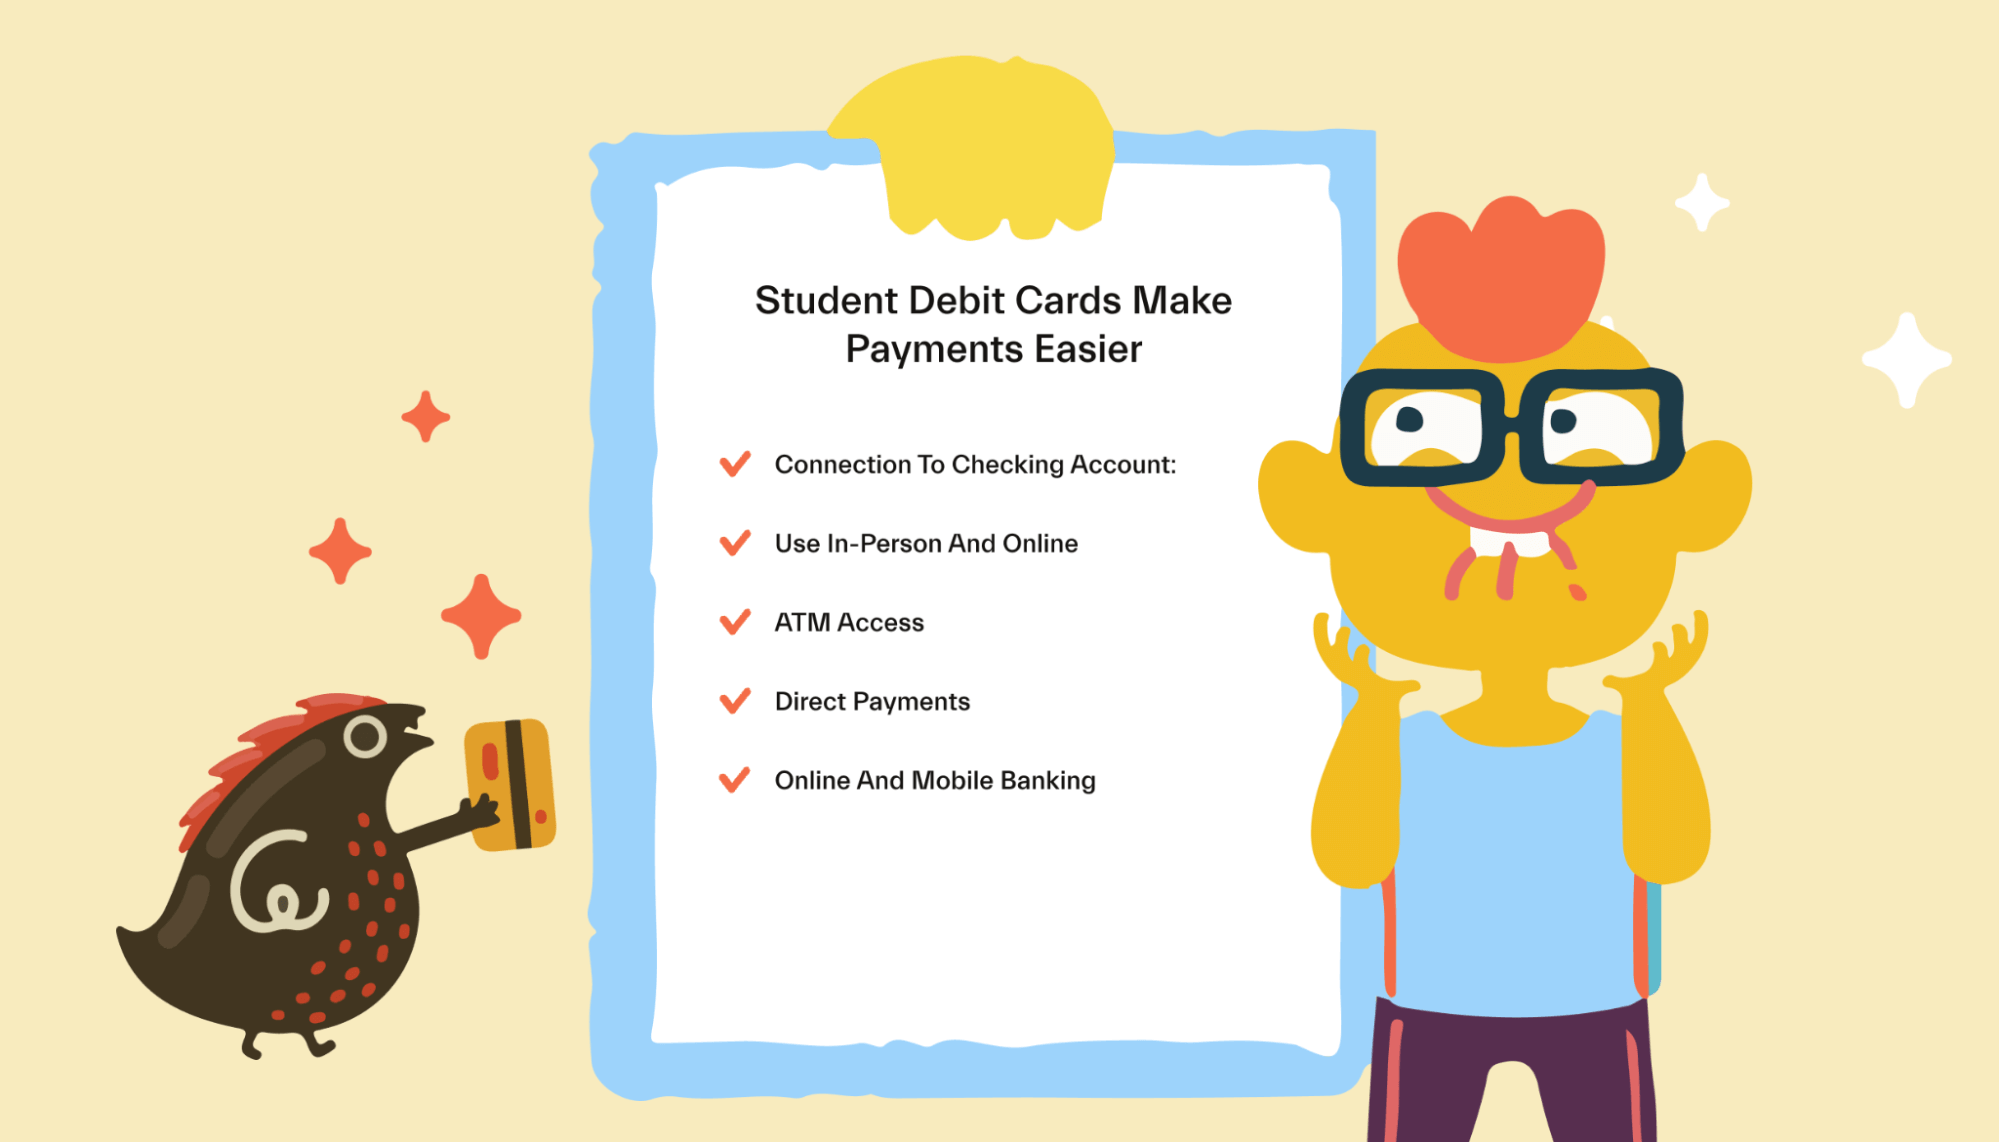 Common Features of Student Debit Cards